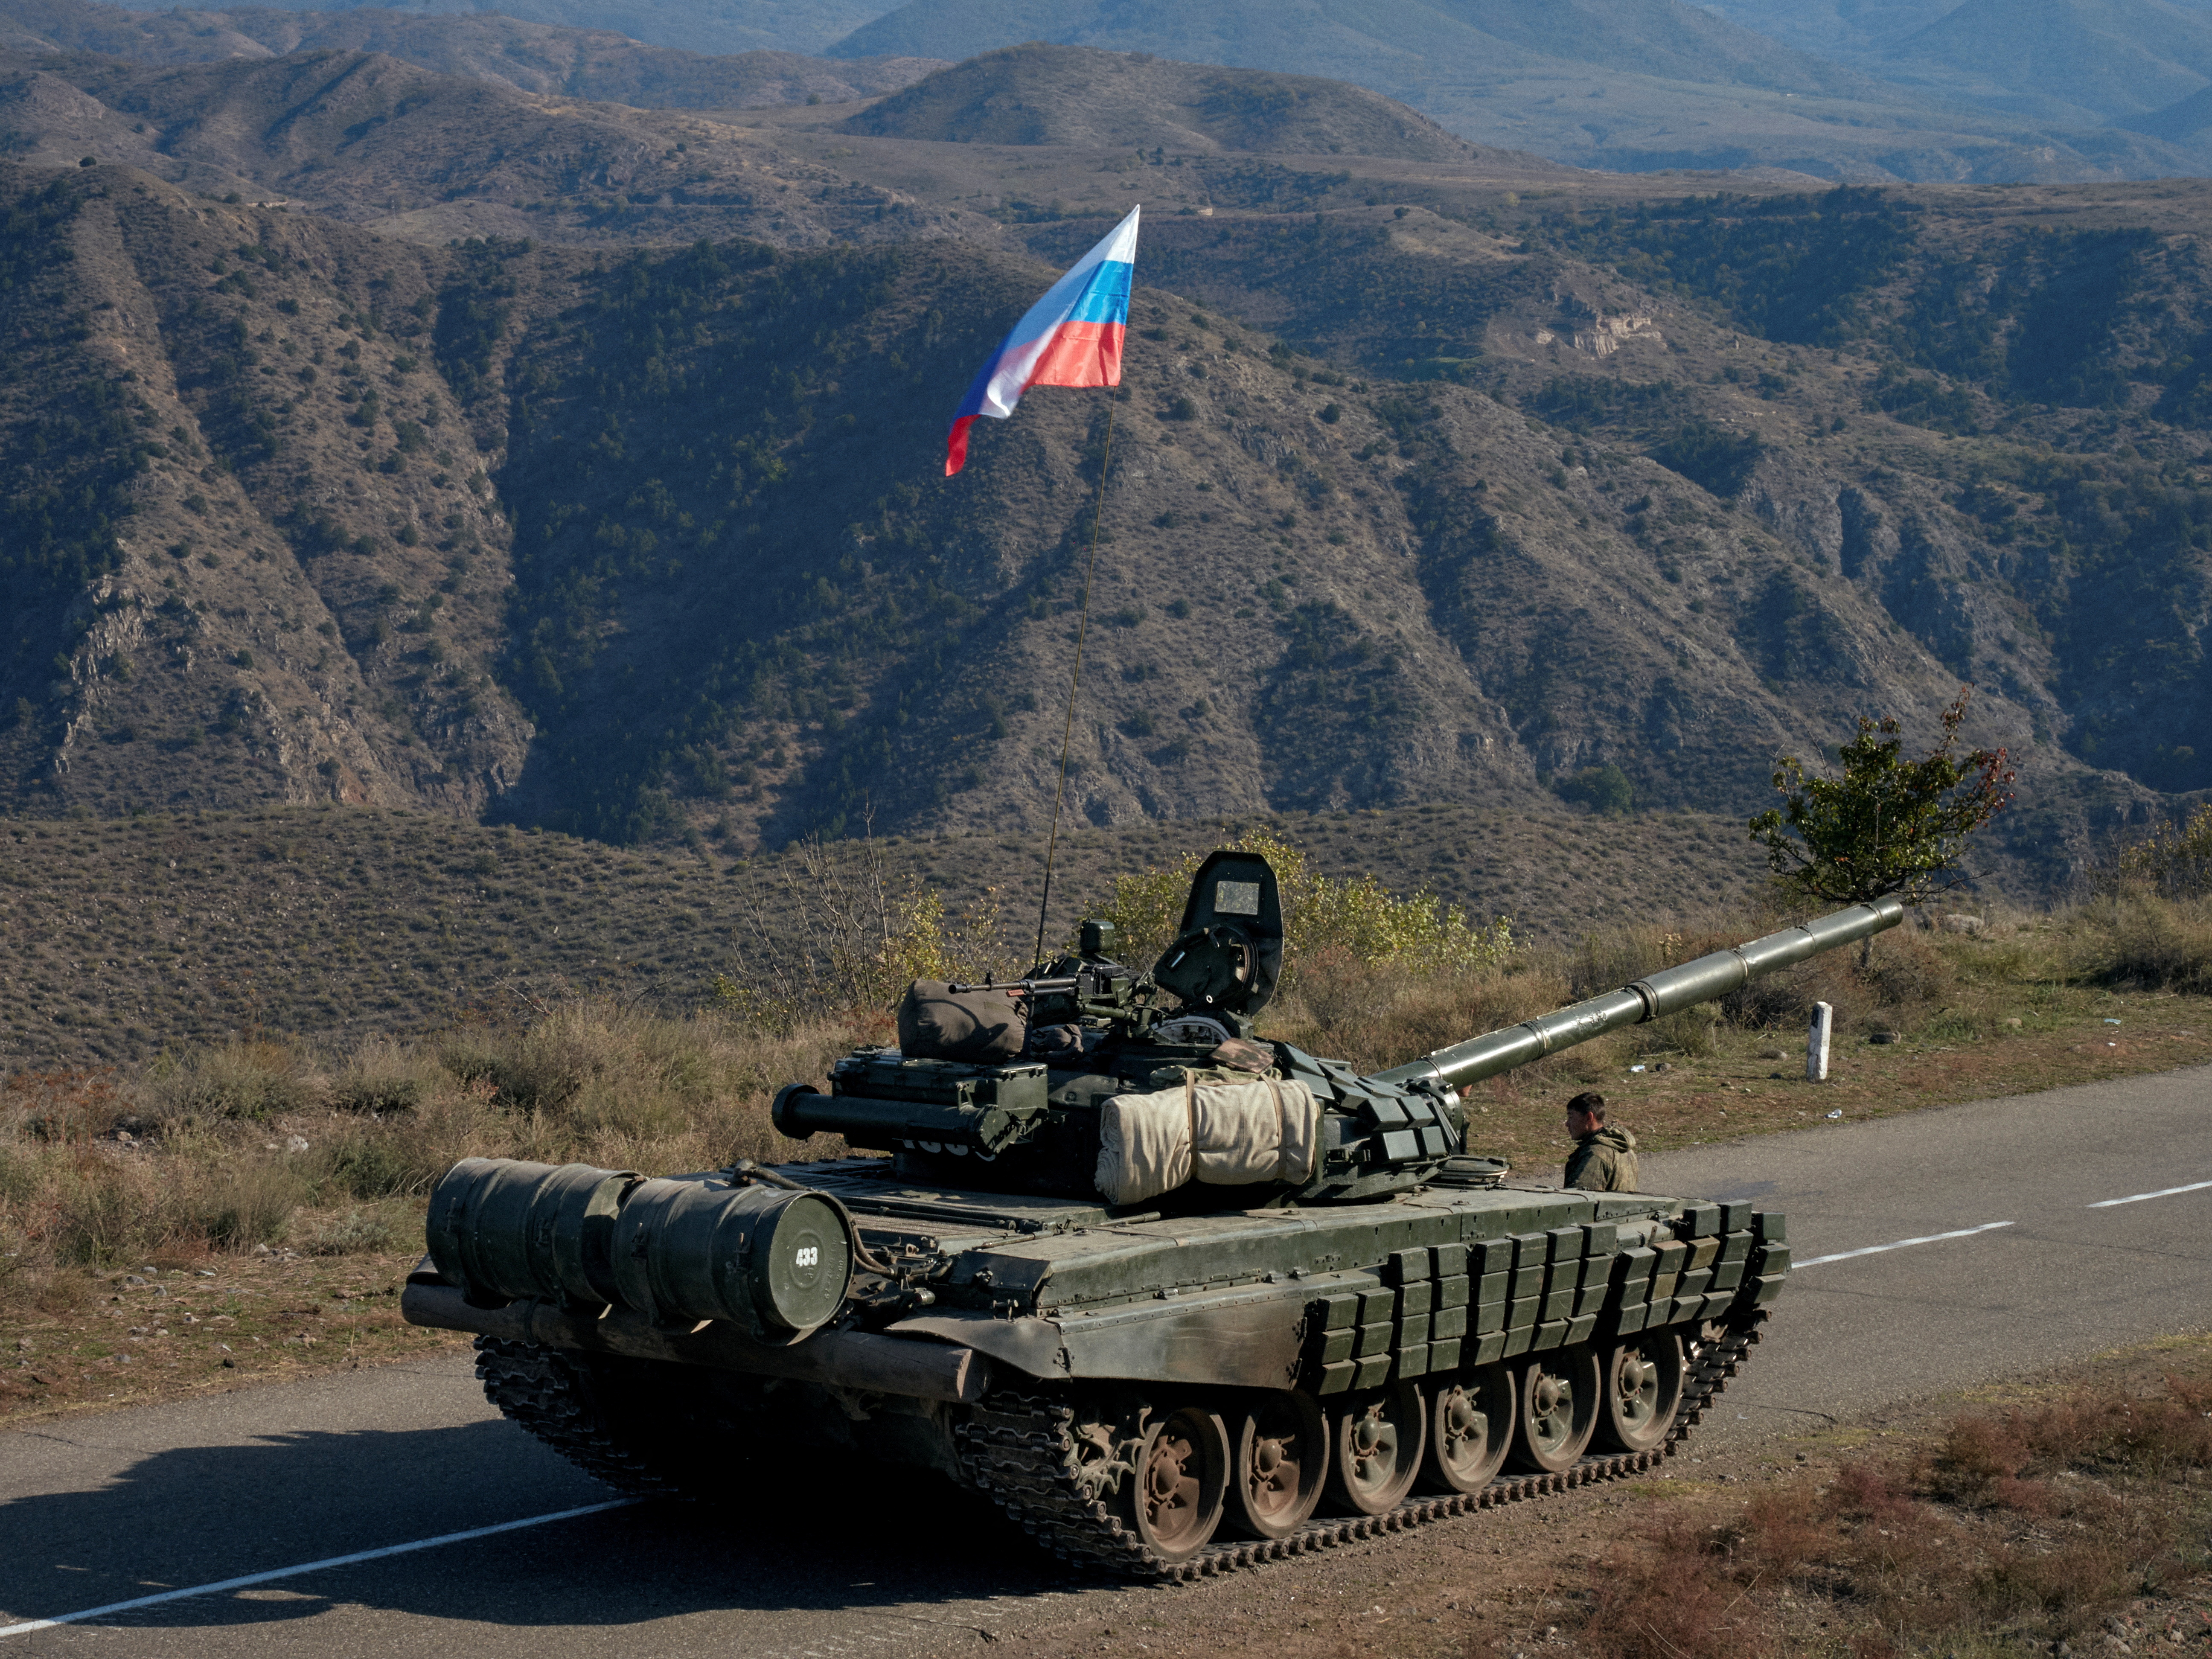 A service member of the Russian peacekeeping troops stands next to a tank in Nagorno-Karabakh